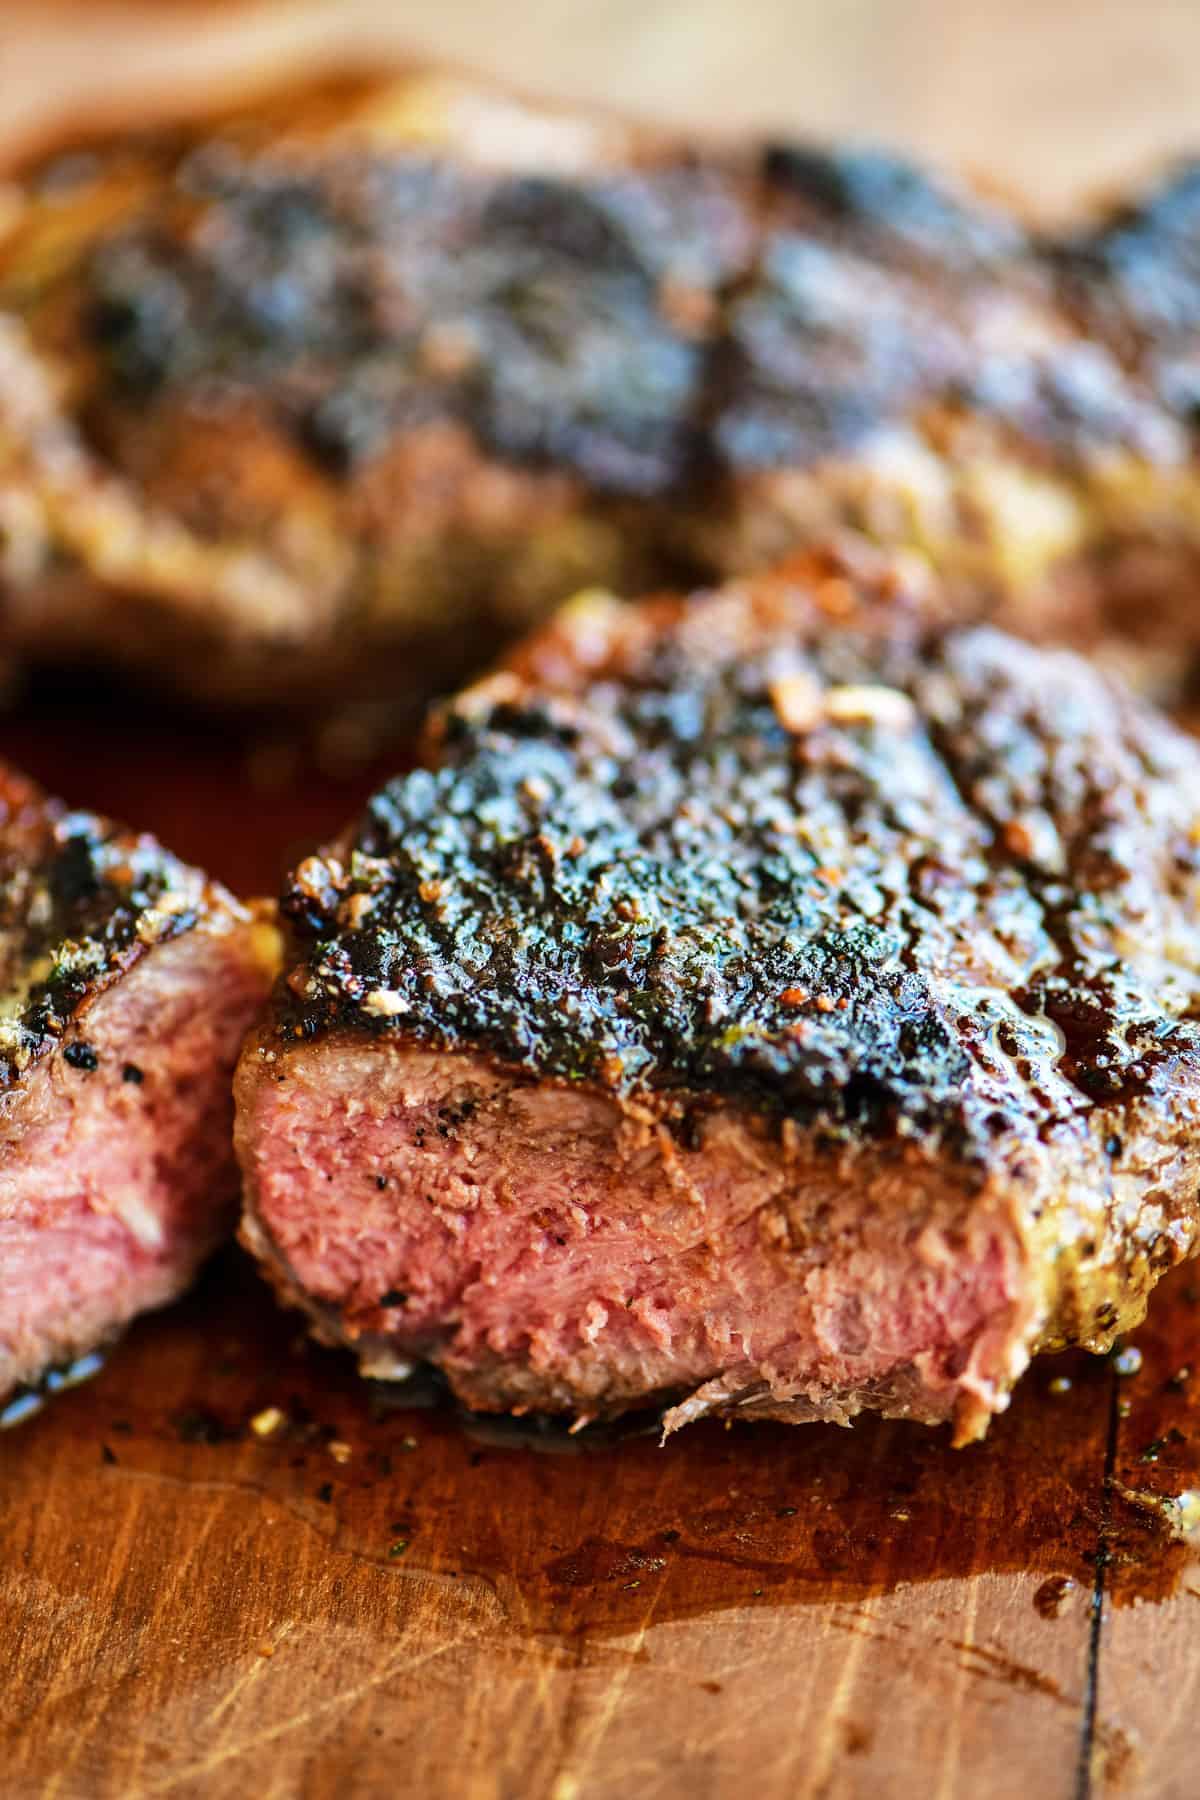 https://www.thegunnysack.com/wp-content/uploads/2019/03/How-To-Cook-Steak-On-The-Stovetop.jpg